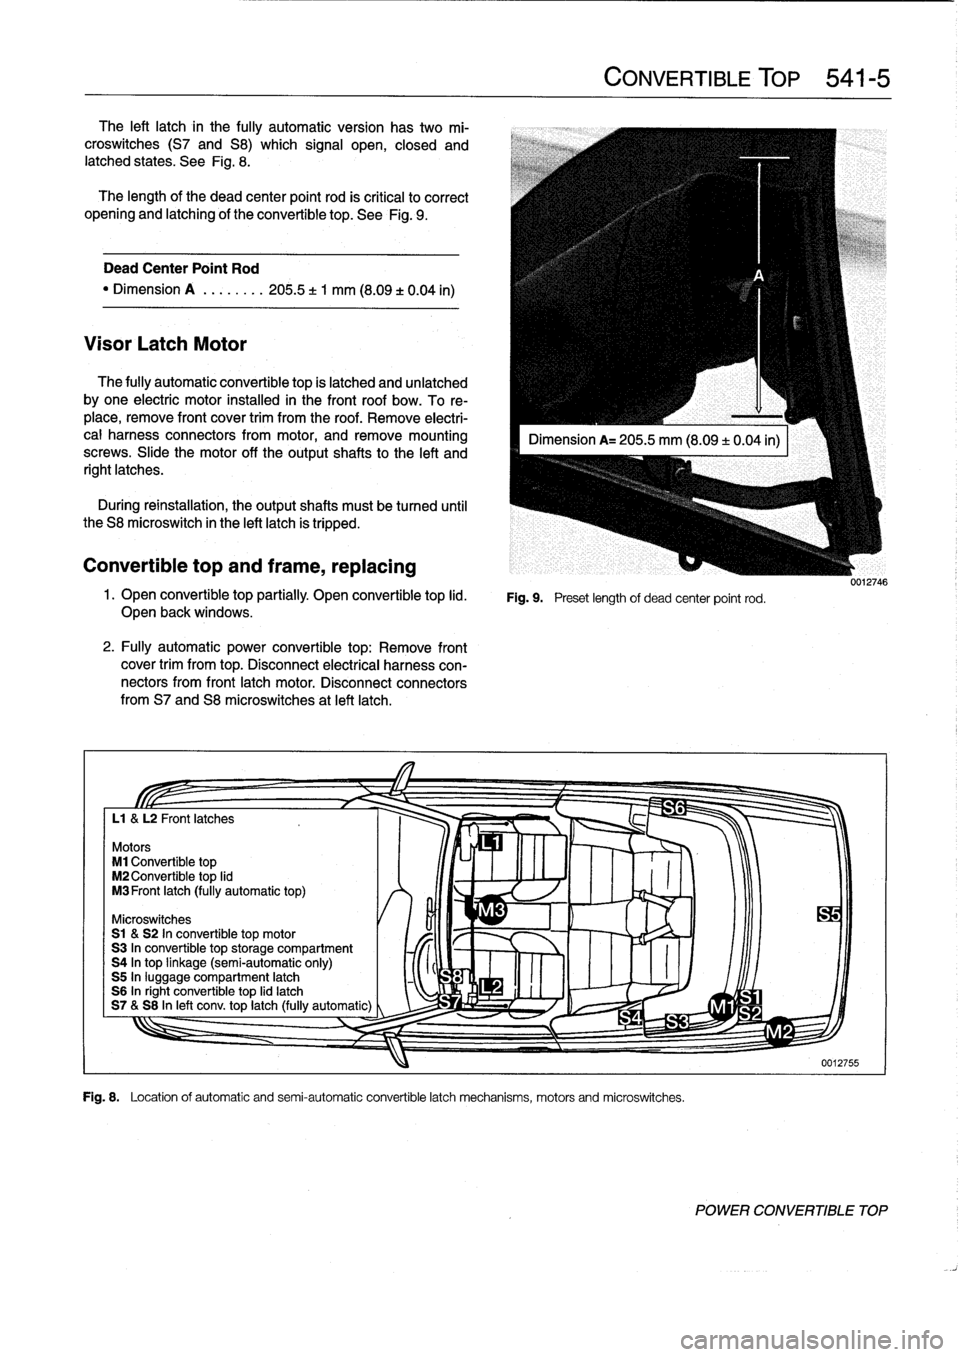 BMW 325i 1996 E36 User Guide 
The
left
latch
in
the
fully
automatic
version
hastwo
mi-
croswitches
(S7
and
S8)which
signal
open,
closed
and
latched
states
.
See
Fig
.
8
.

The
length
of
the
dead
center
point
rod
is
critica¡
lo
c